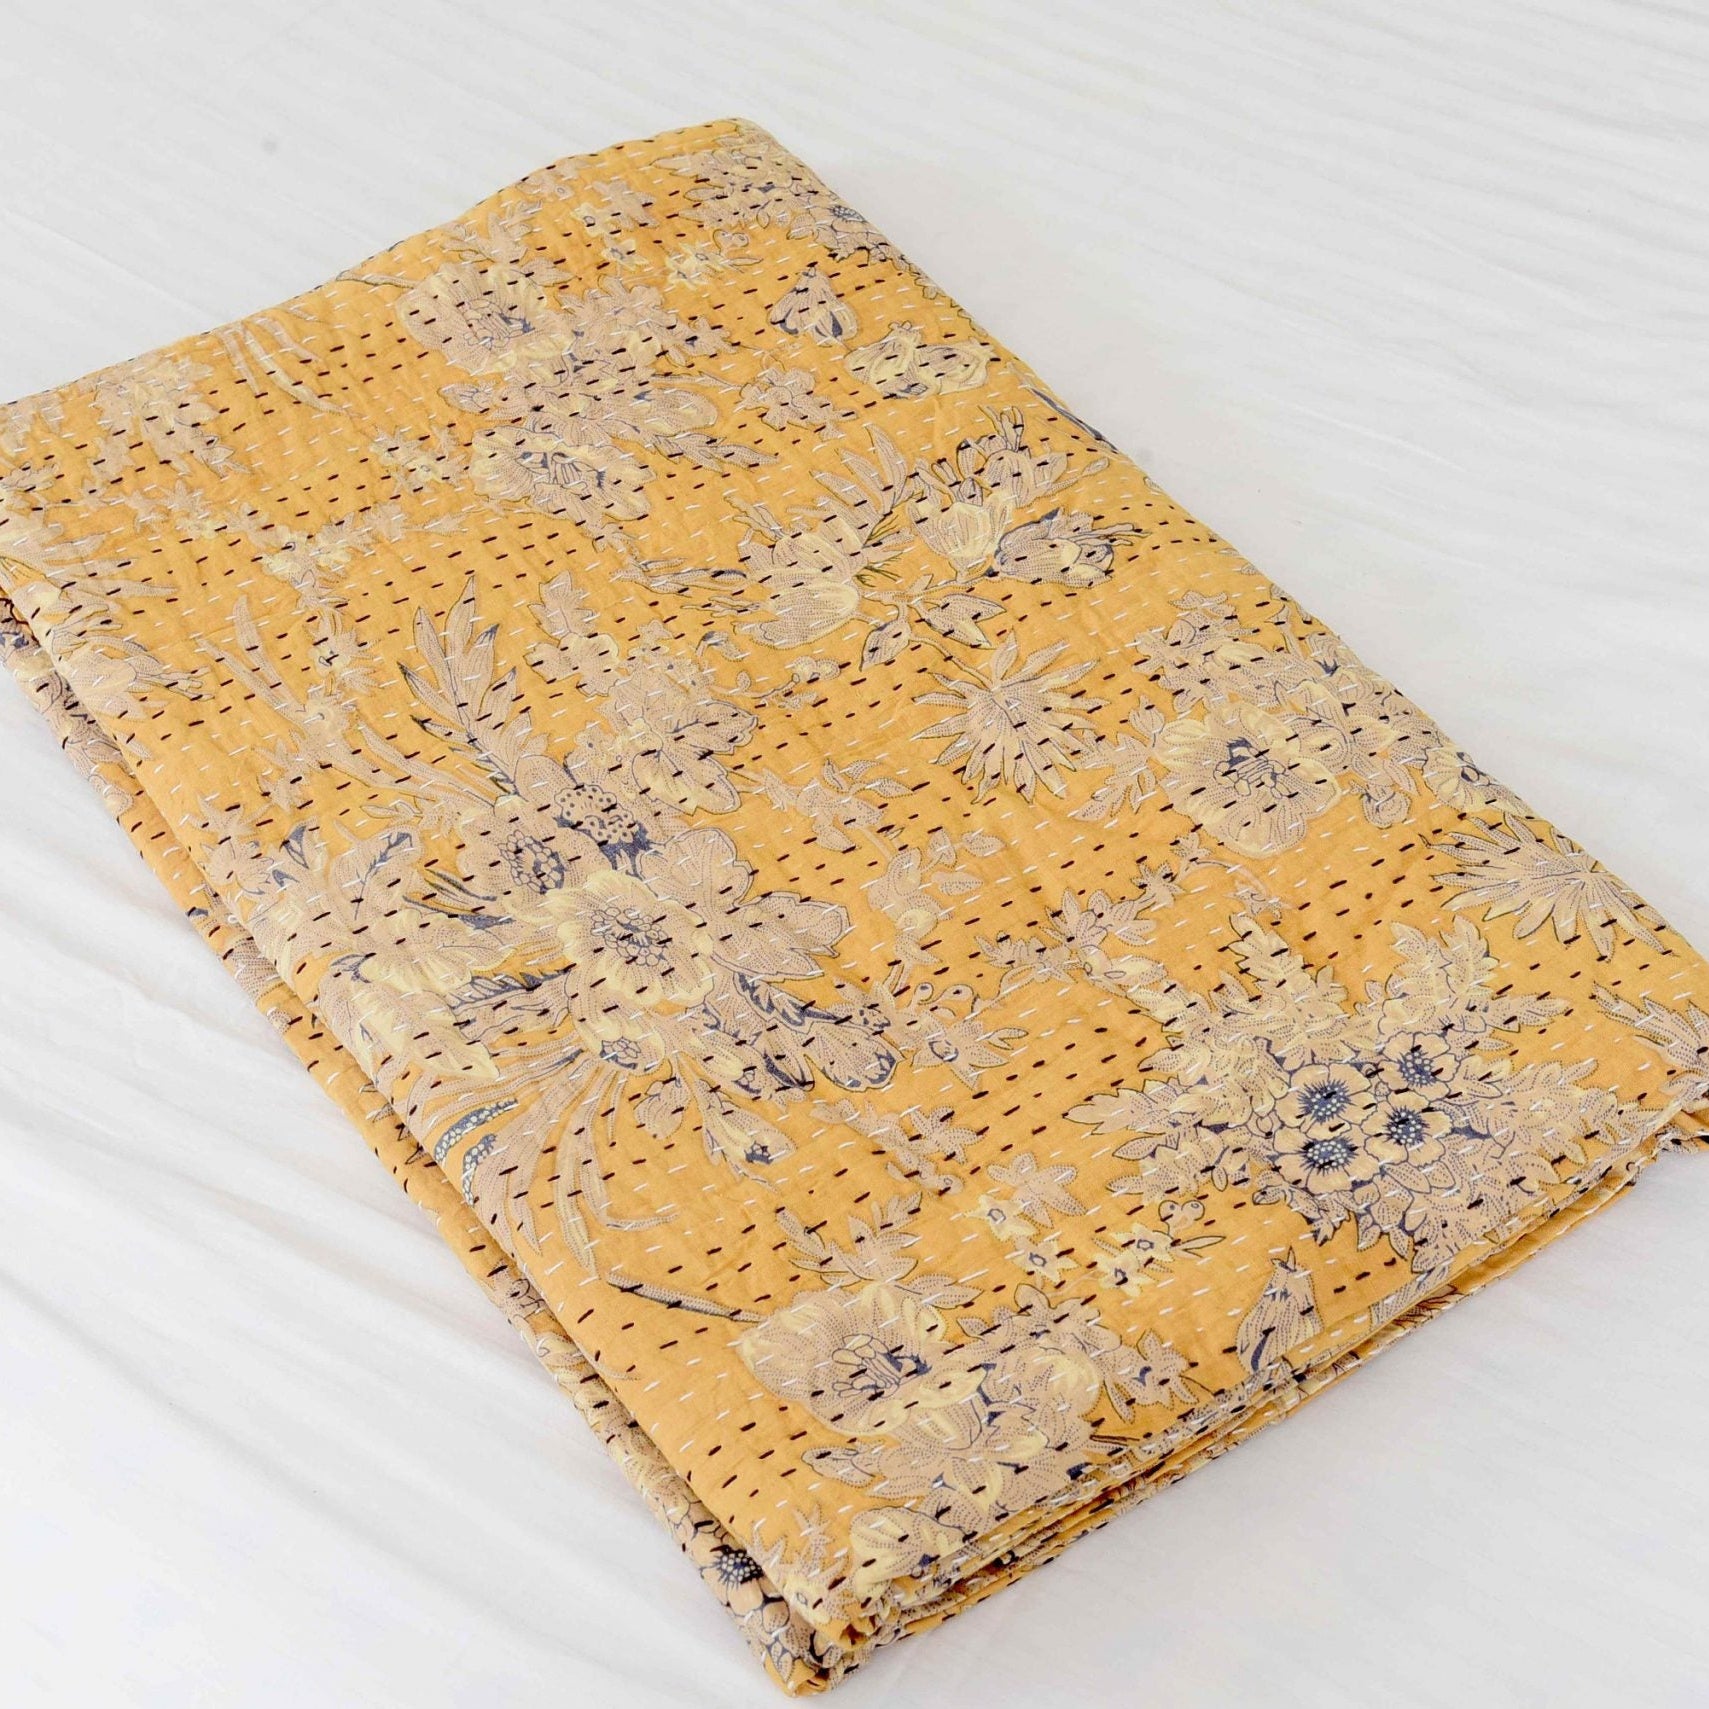 Linen Connections Handmade Indian Kantha Quilt - Pale Fiery